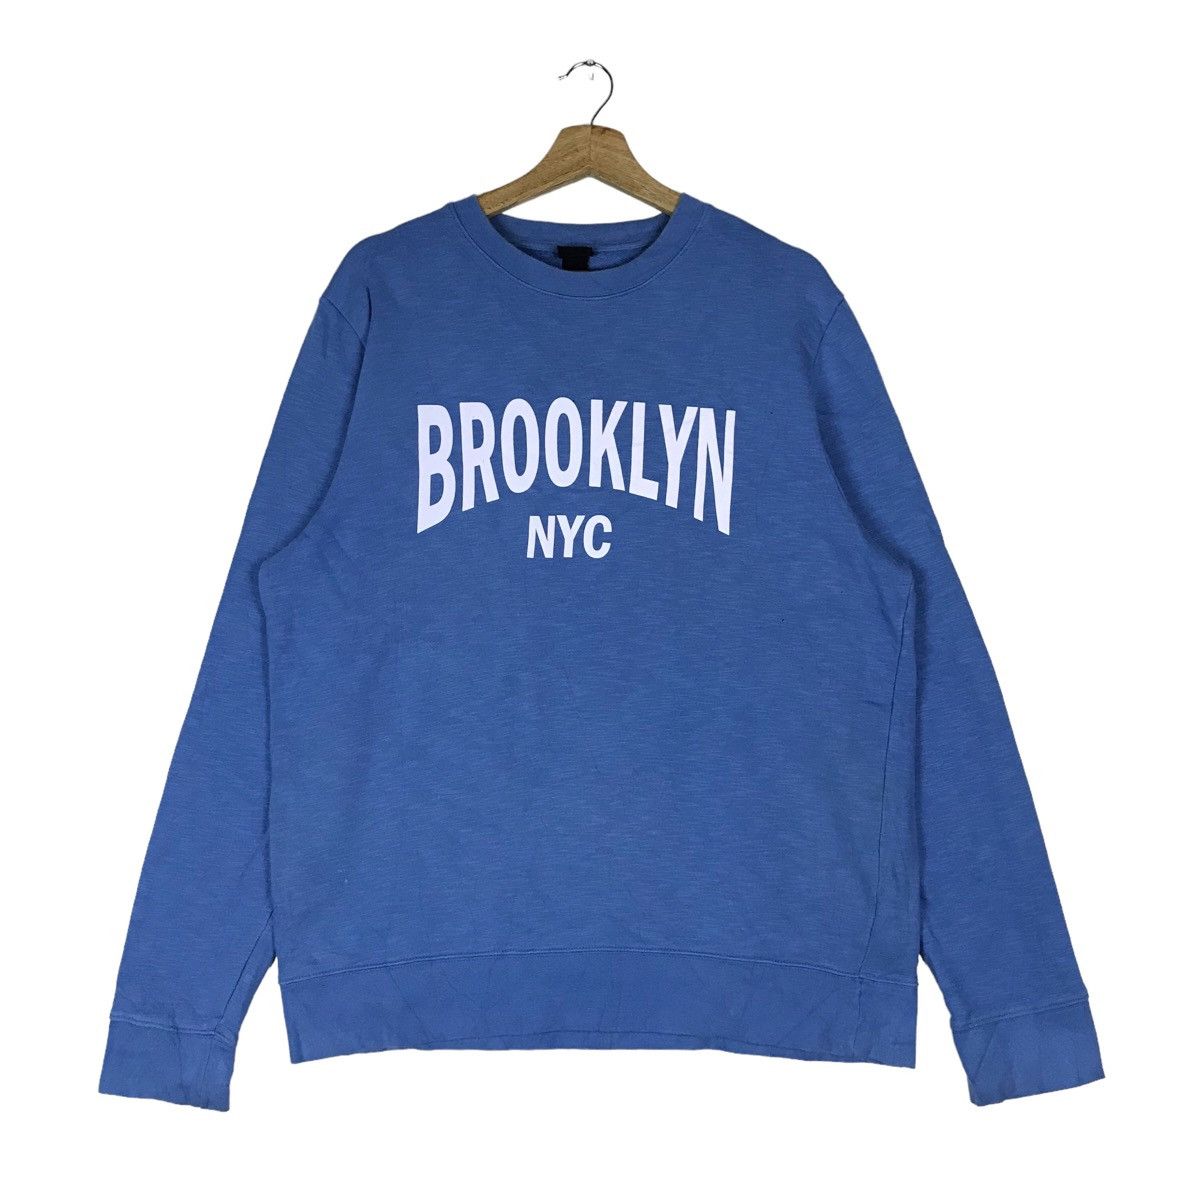 H&M Hennes and Mauritz H&M Brooklyn NYC Spell Out Pullover Size US L / EU 52-54 / 3 - 1 Preview